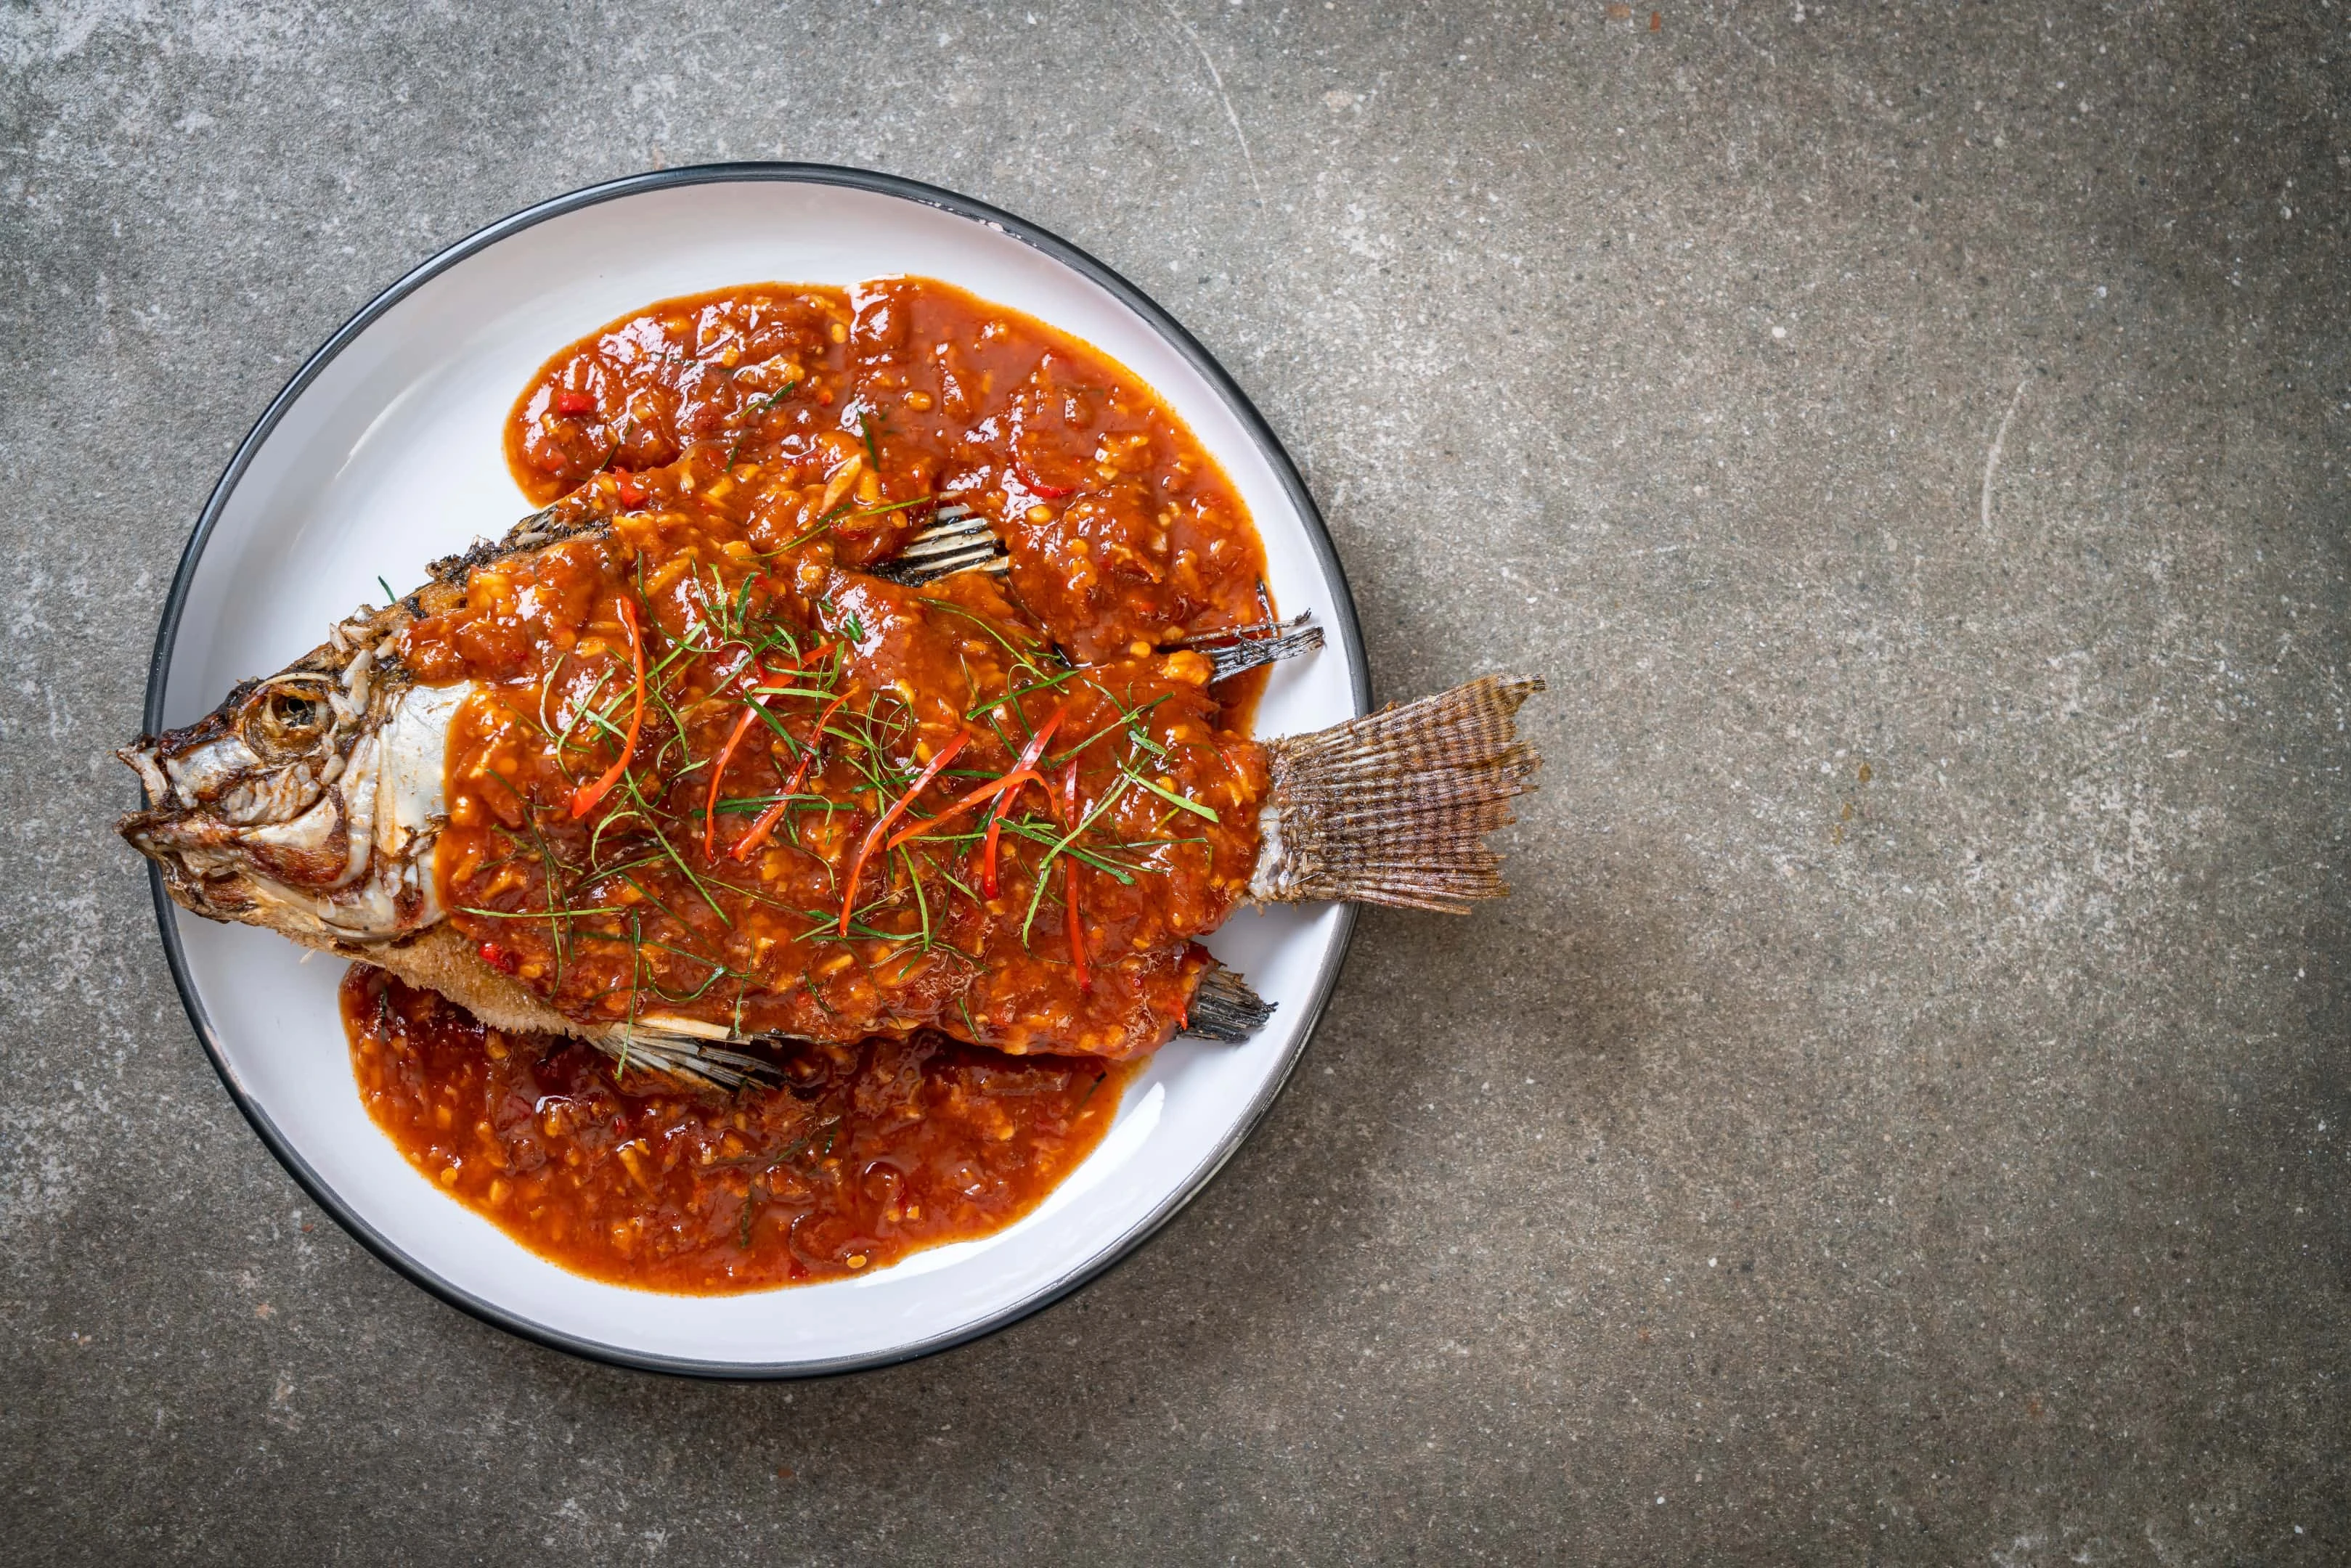 Fried fish with xo sauce